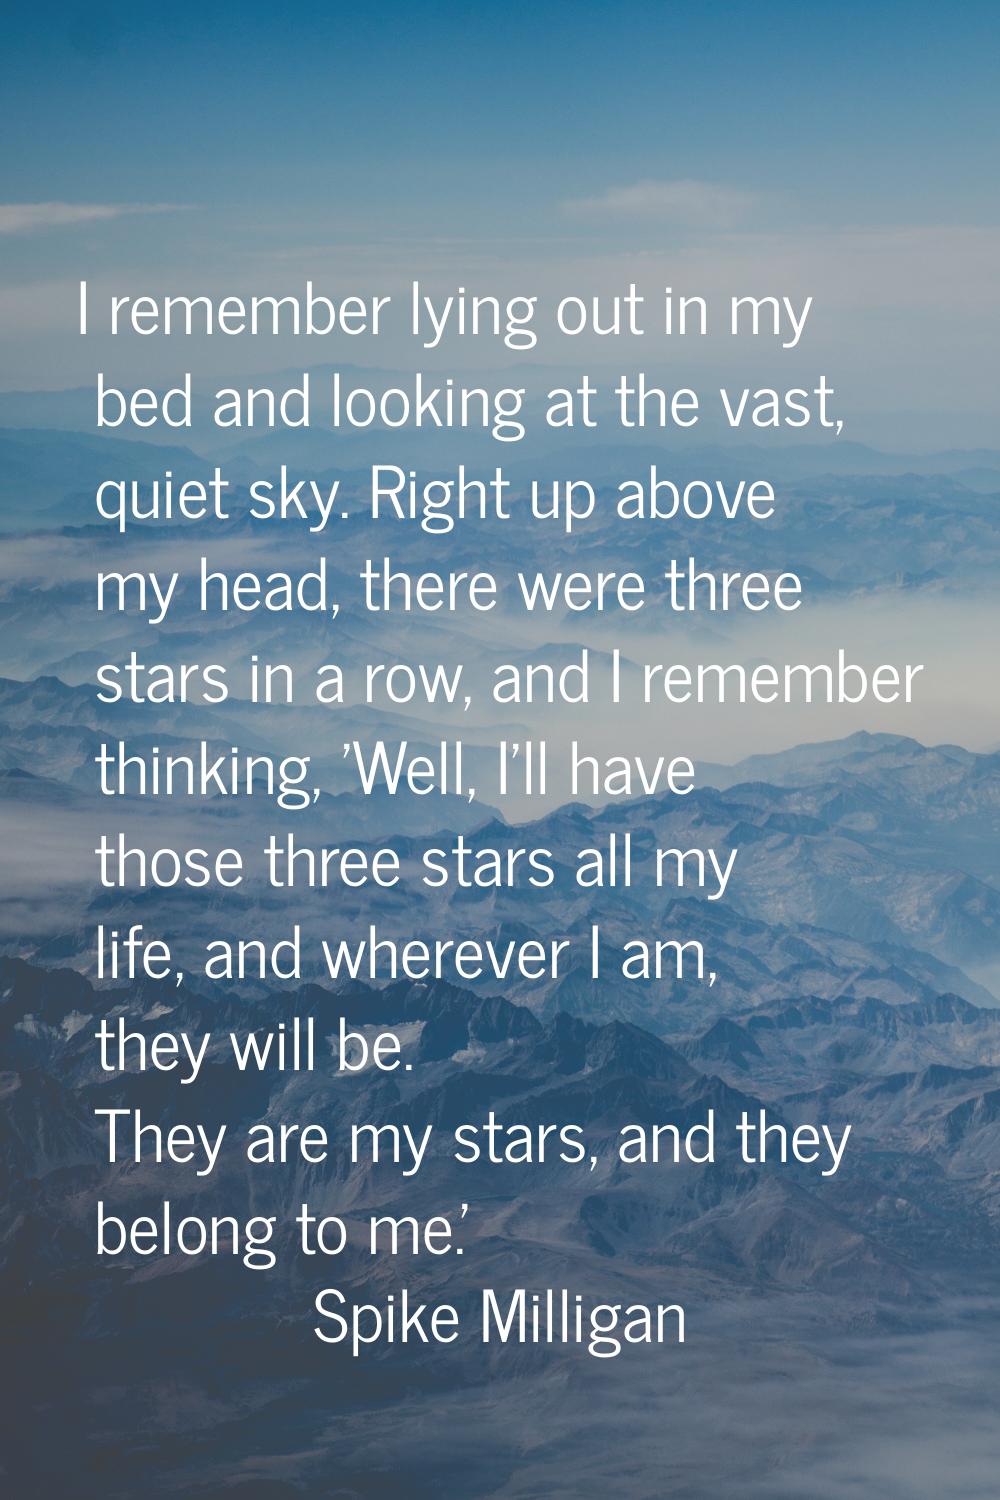 I remember lying out in my bed and looking at the vast, quiet sky. Right up above my head, there we